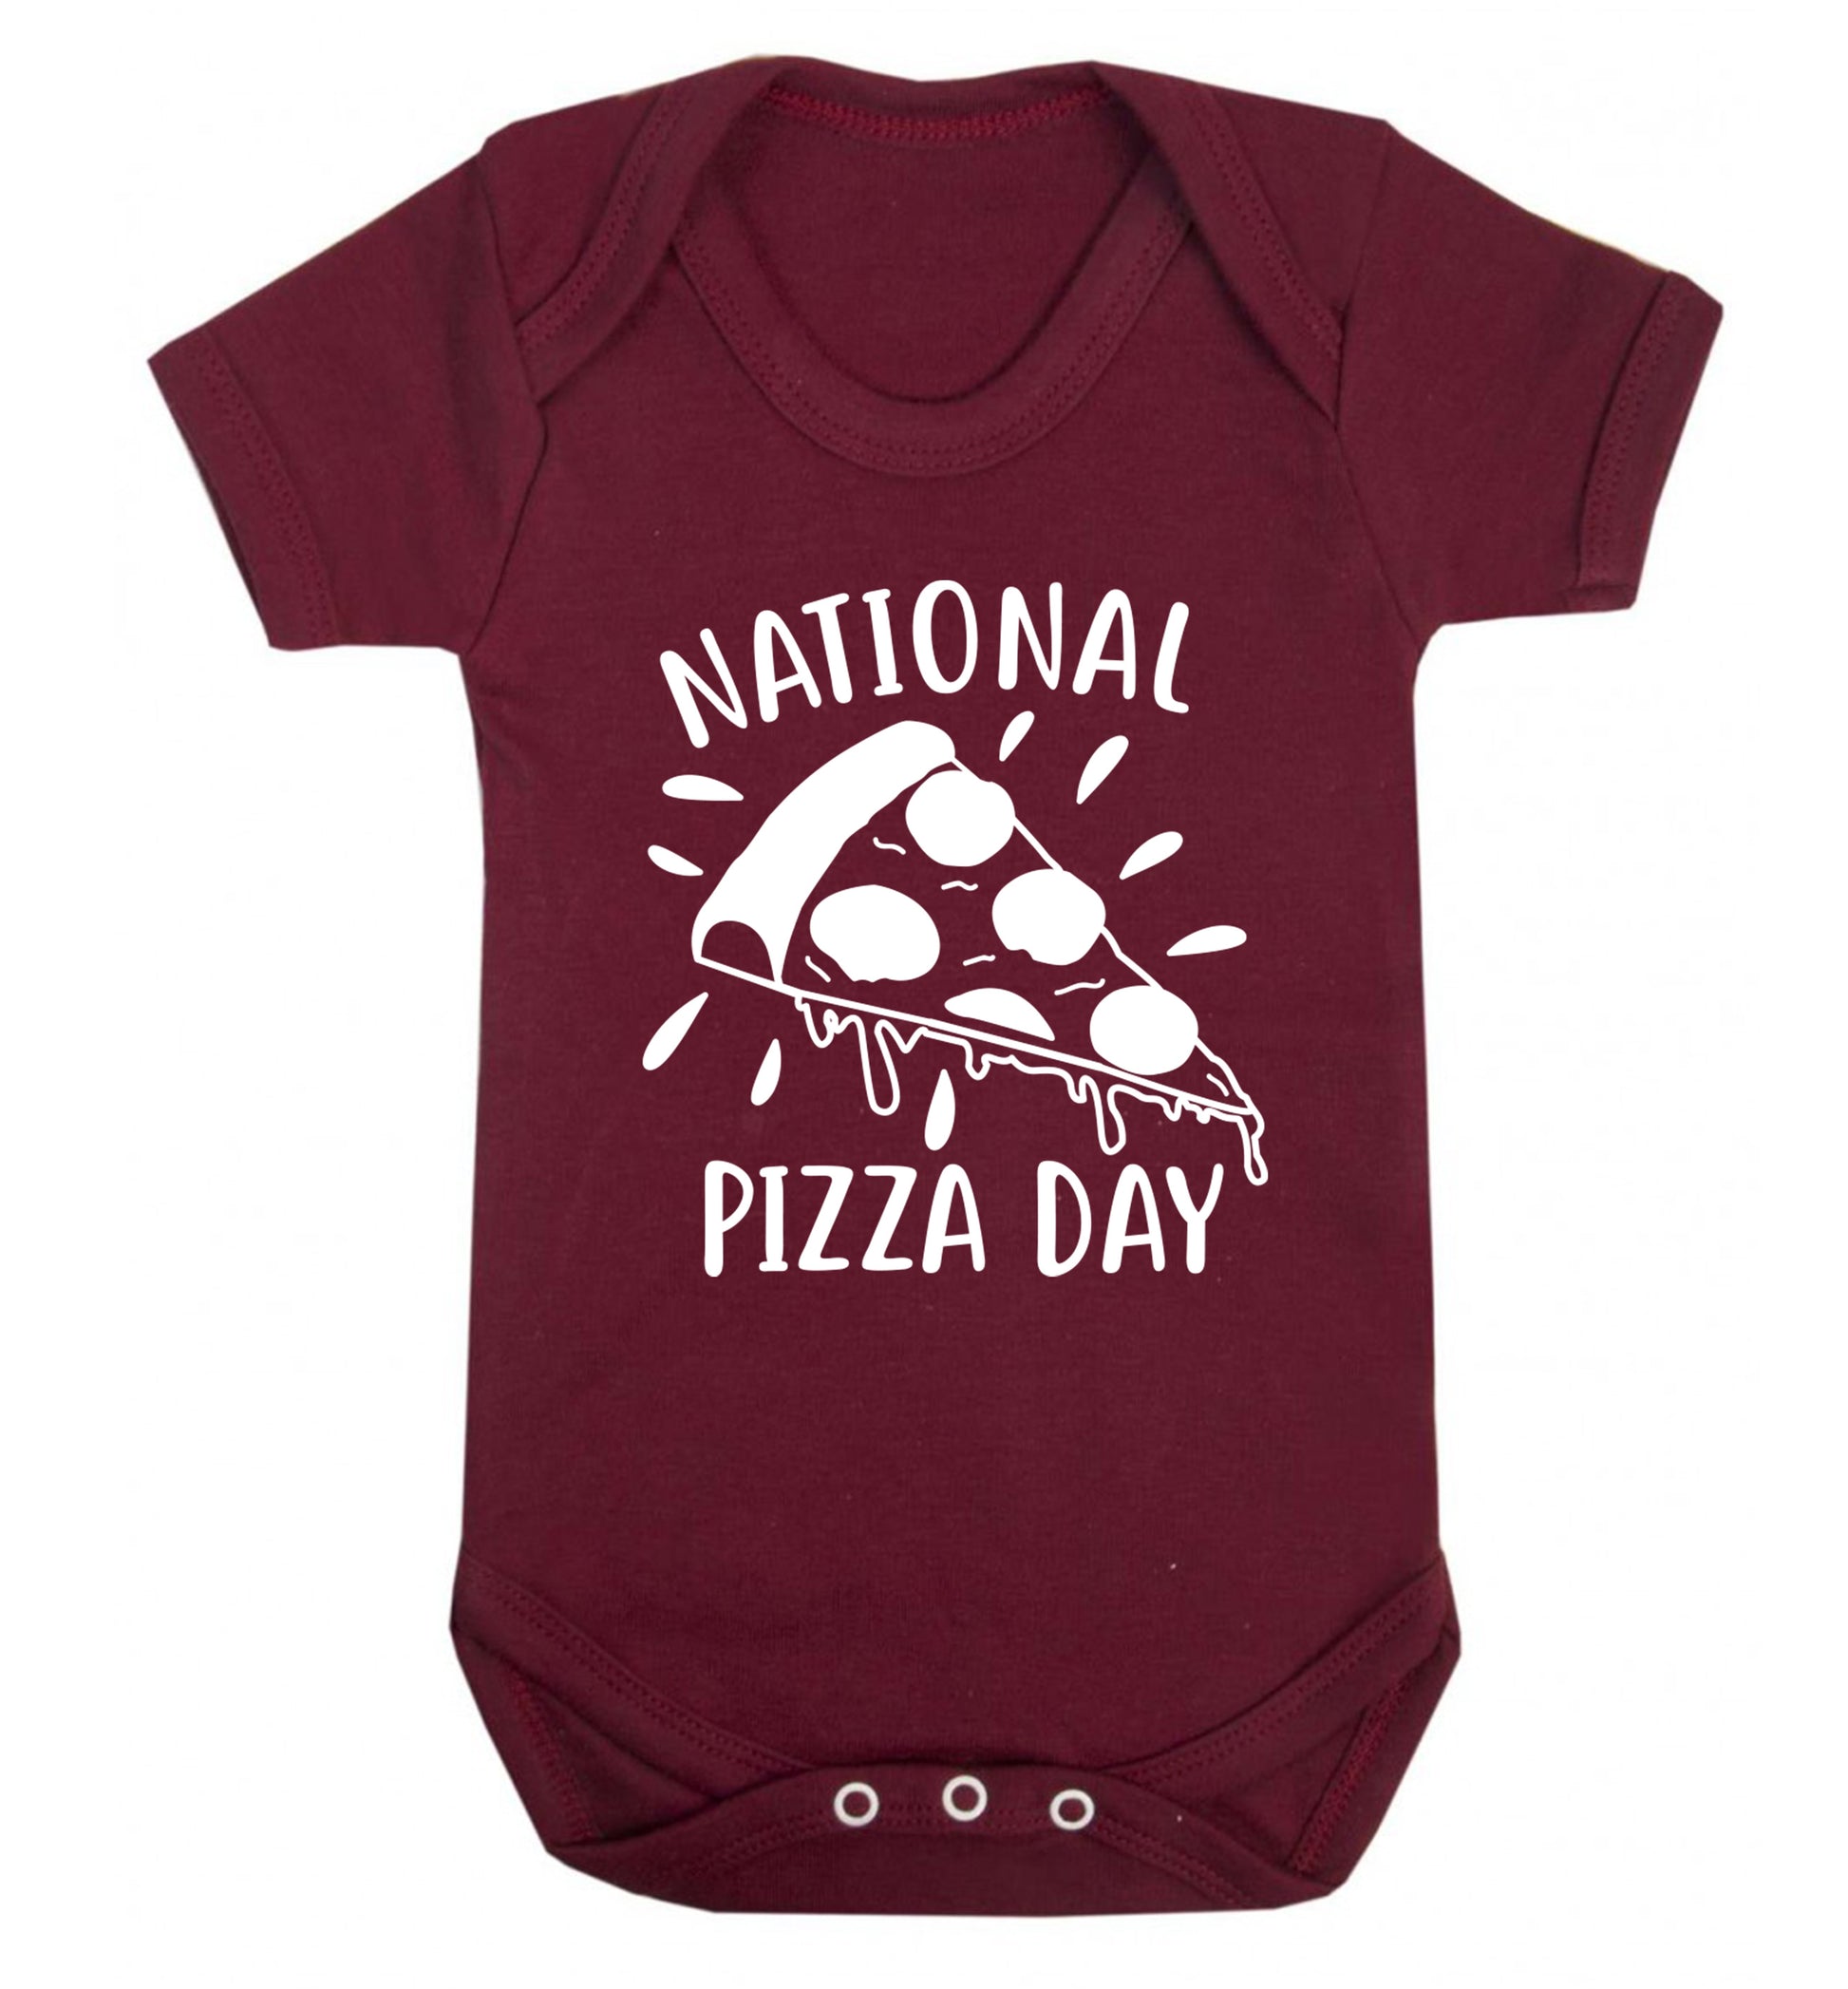 National pizza day Baby Vest maroon 18-24 months